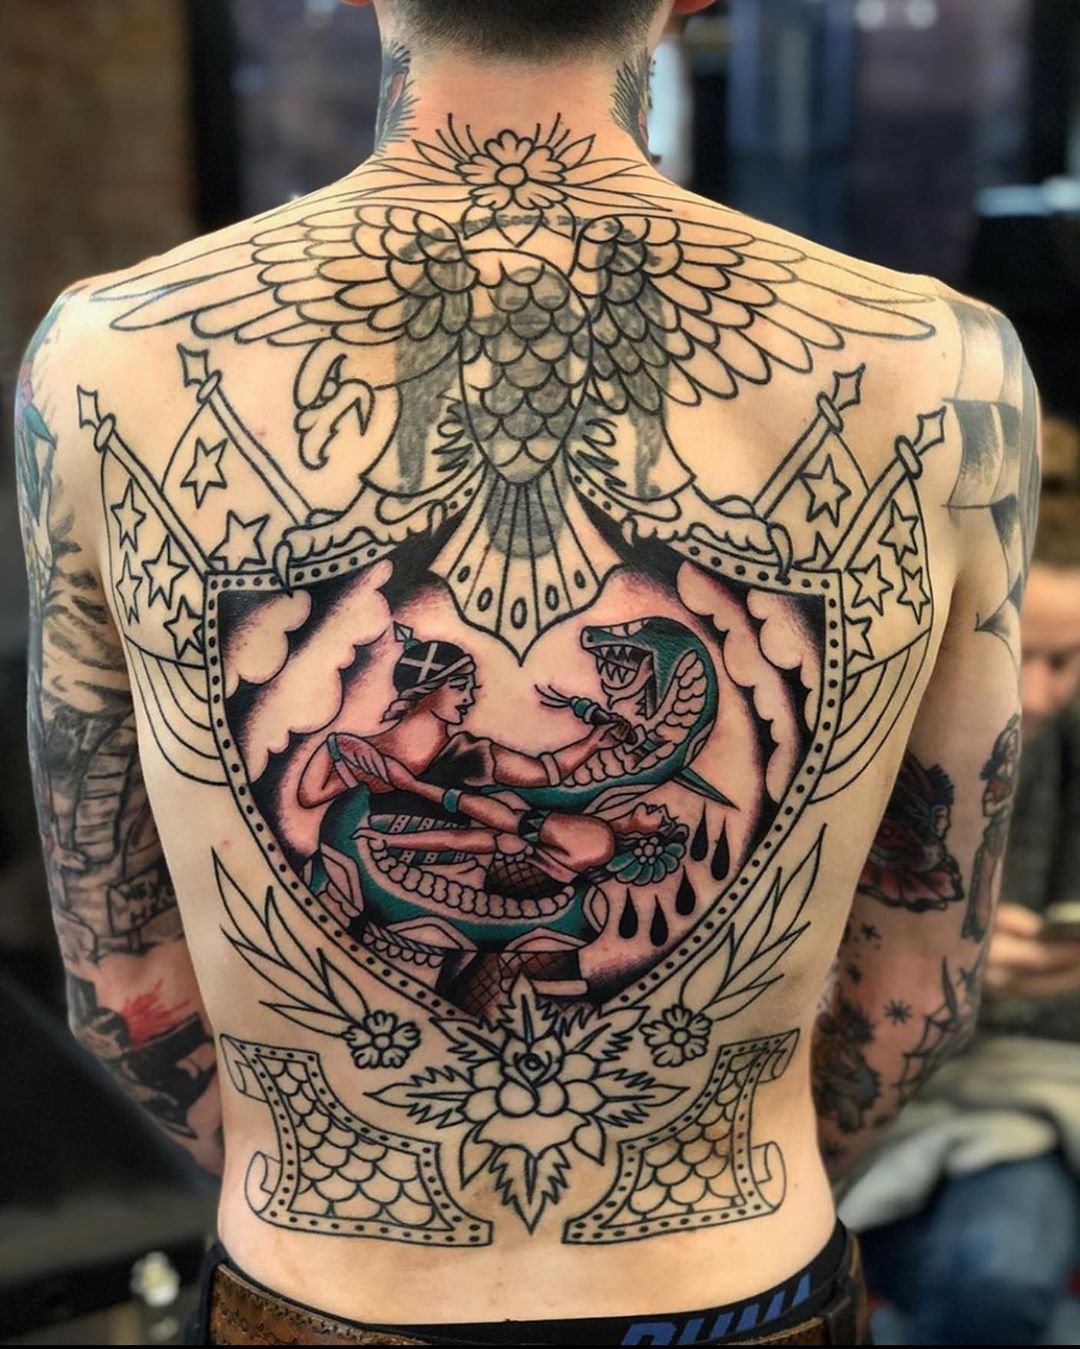 Michael Ferrera was working on this back piece last month.